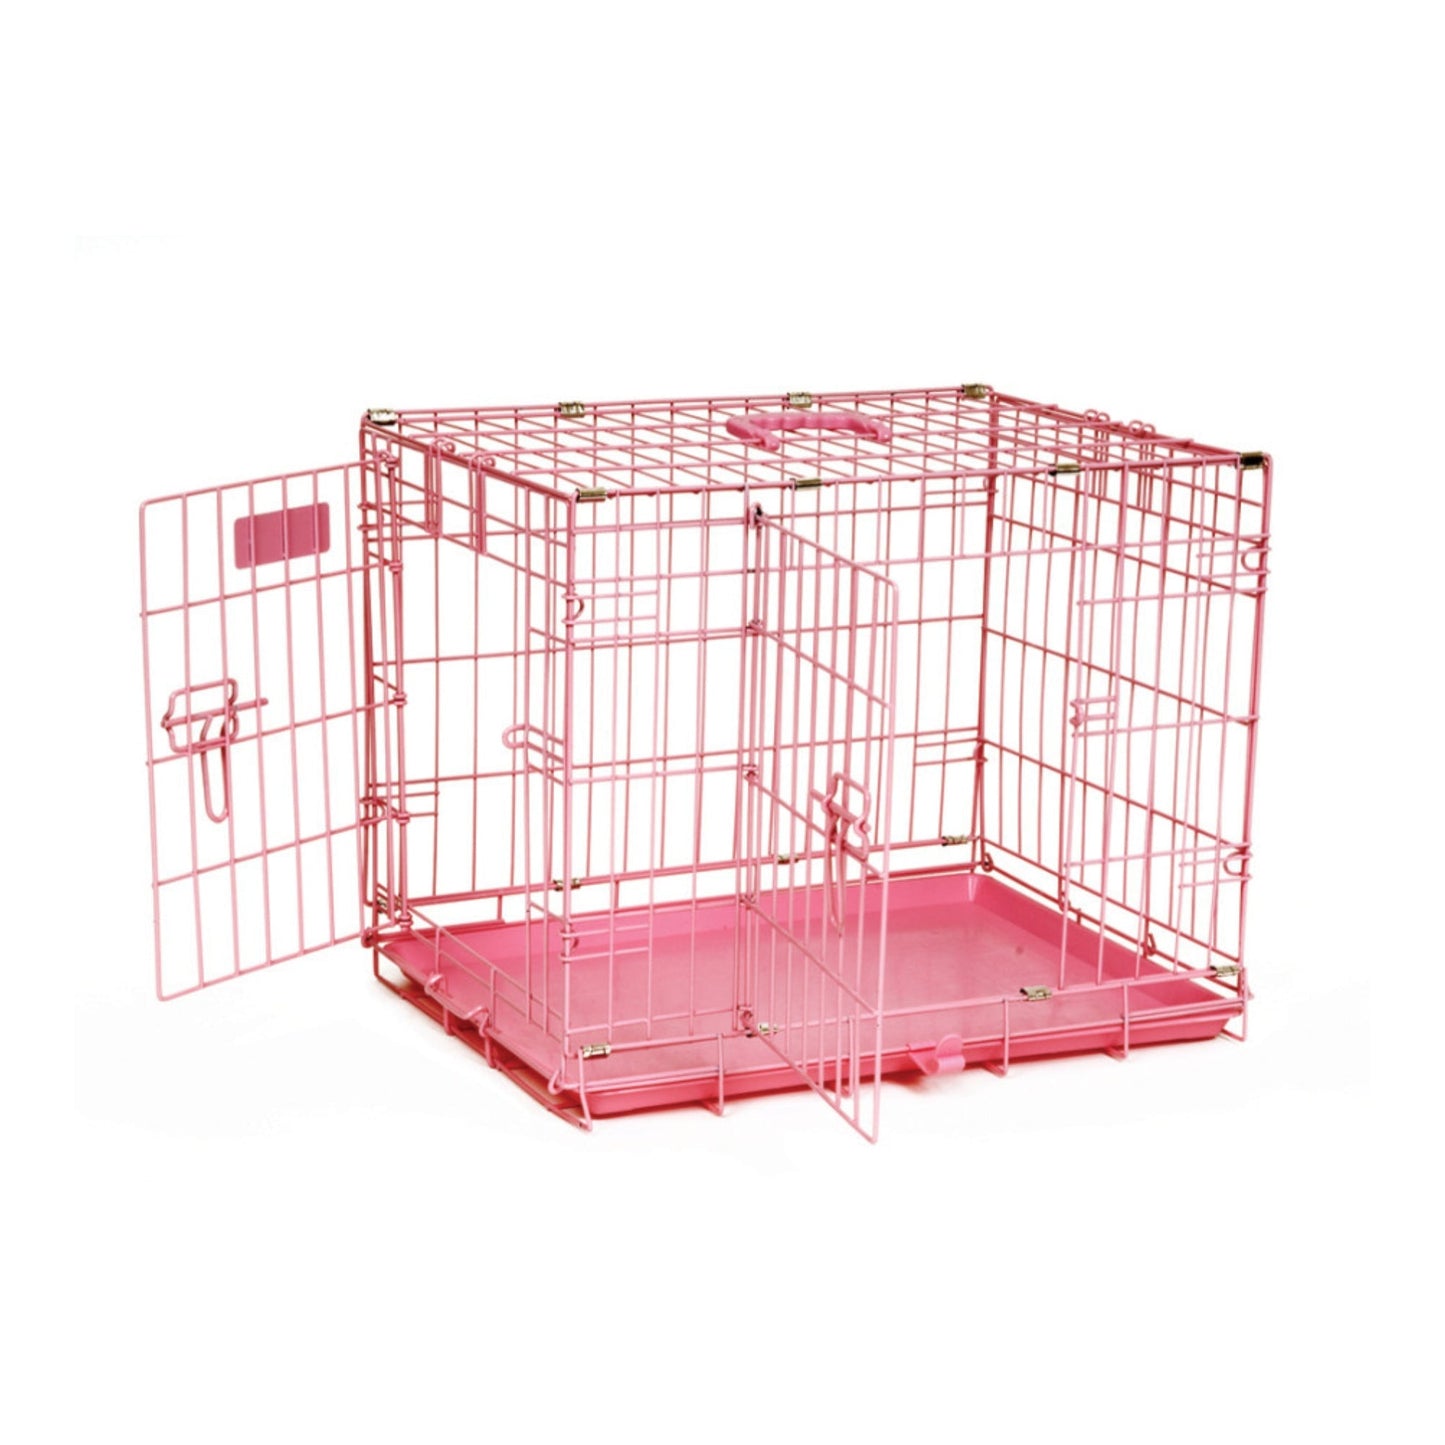 Precision Pet Products ProValu Dog Crate 2000 2 Door Pink 1ea/24 in